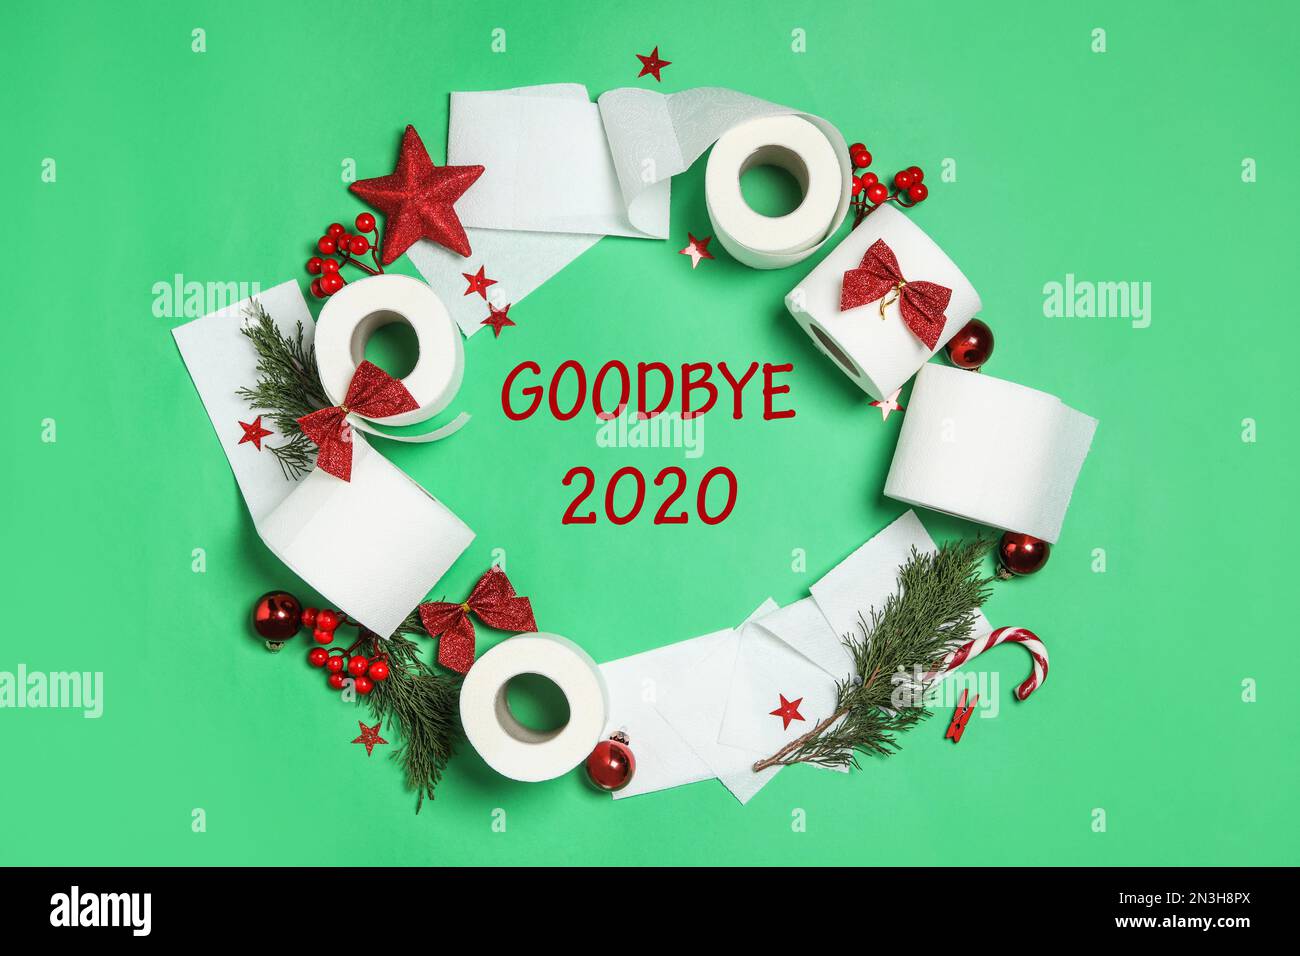 Flat lay composition with text Goodbye 2020 and toilet paper on green background, flat lay Stock Photo